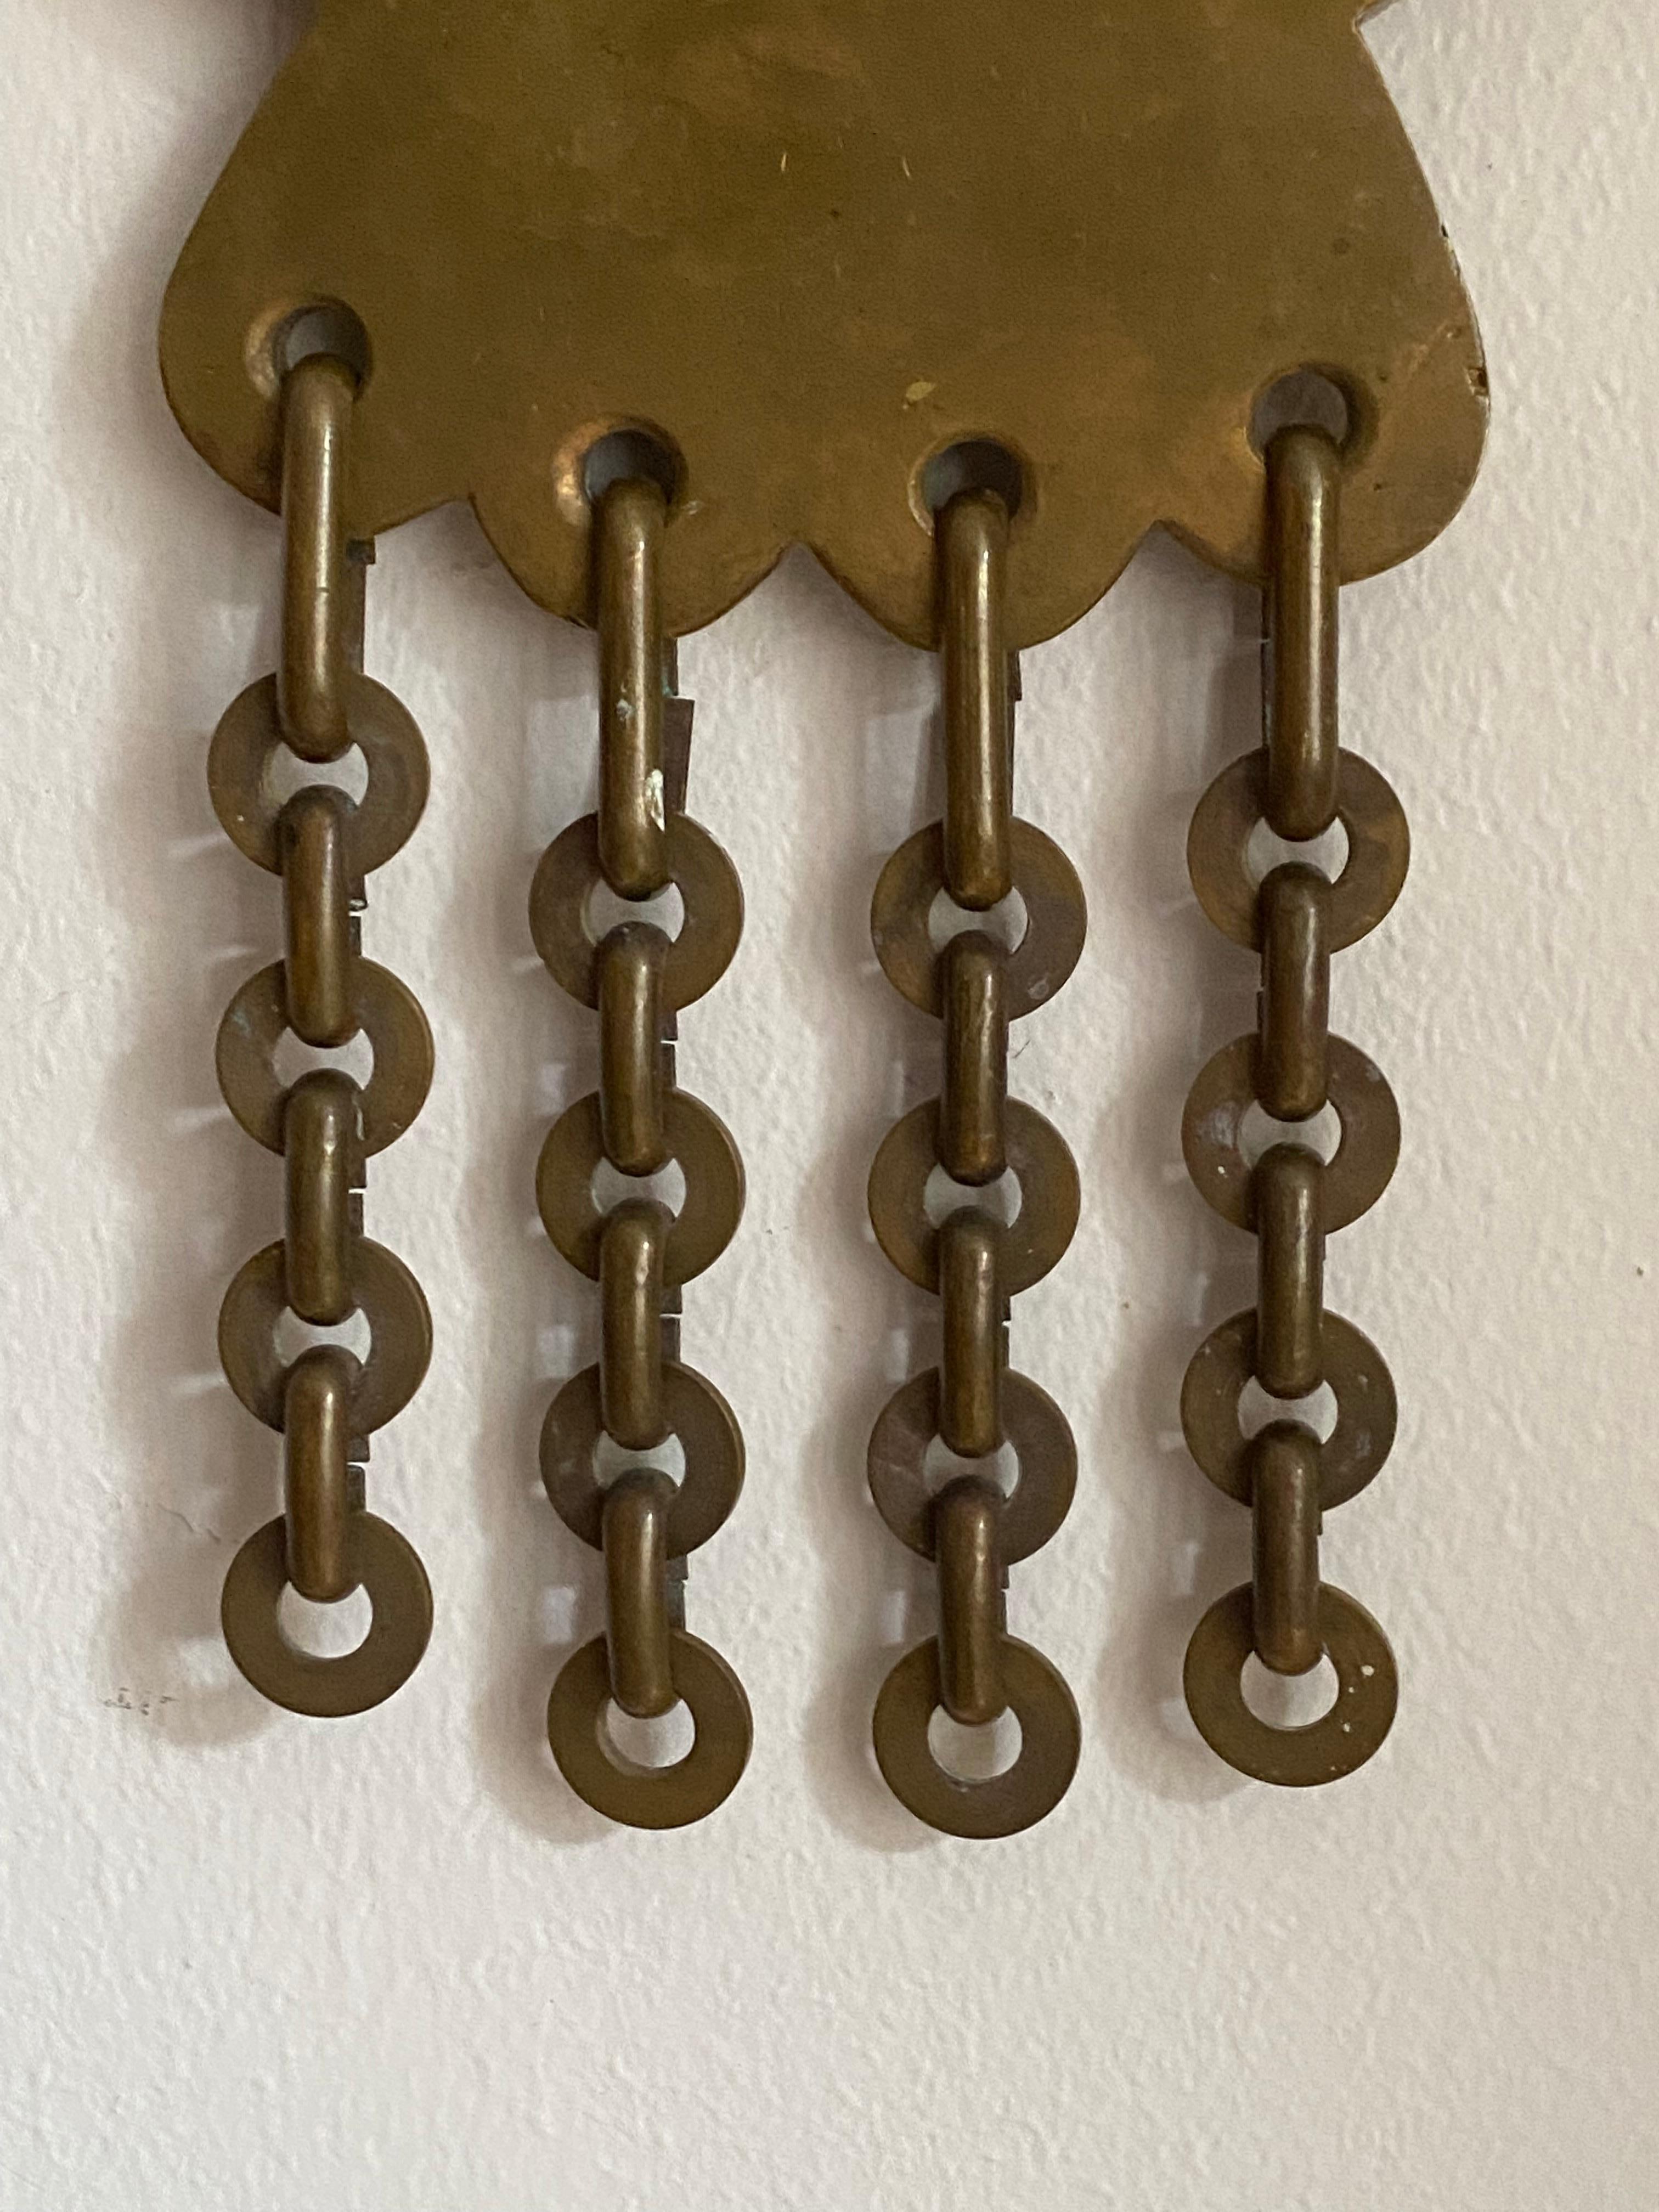 A small organic wall mirror, produced in Italy, 1940s. In heavy alloy brass with ornamental chains.

Other designers of the period include Gio Ponti, Fontana Arte, Max Ingrand, Franco Albini, and Josef Frank.